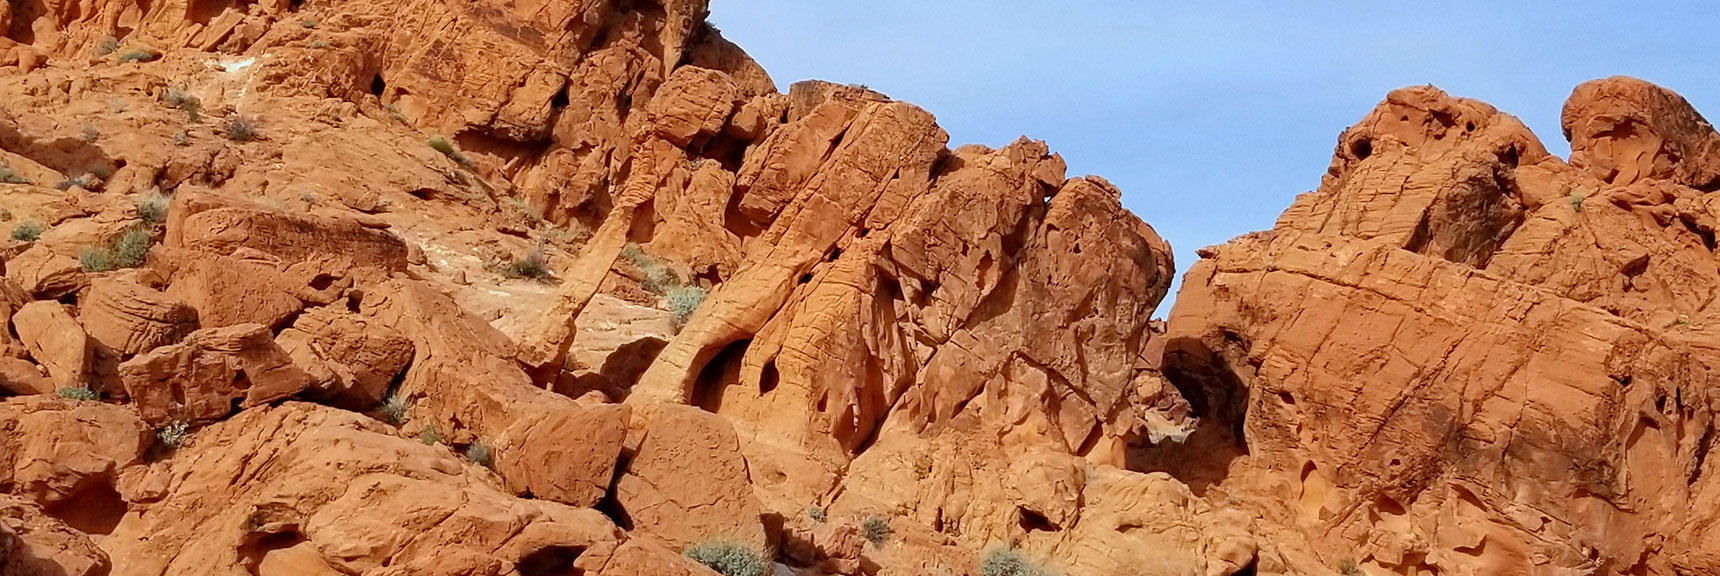 Elephant Rock Loop in Valley of Fire State Park, Nevada